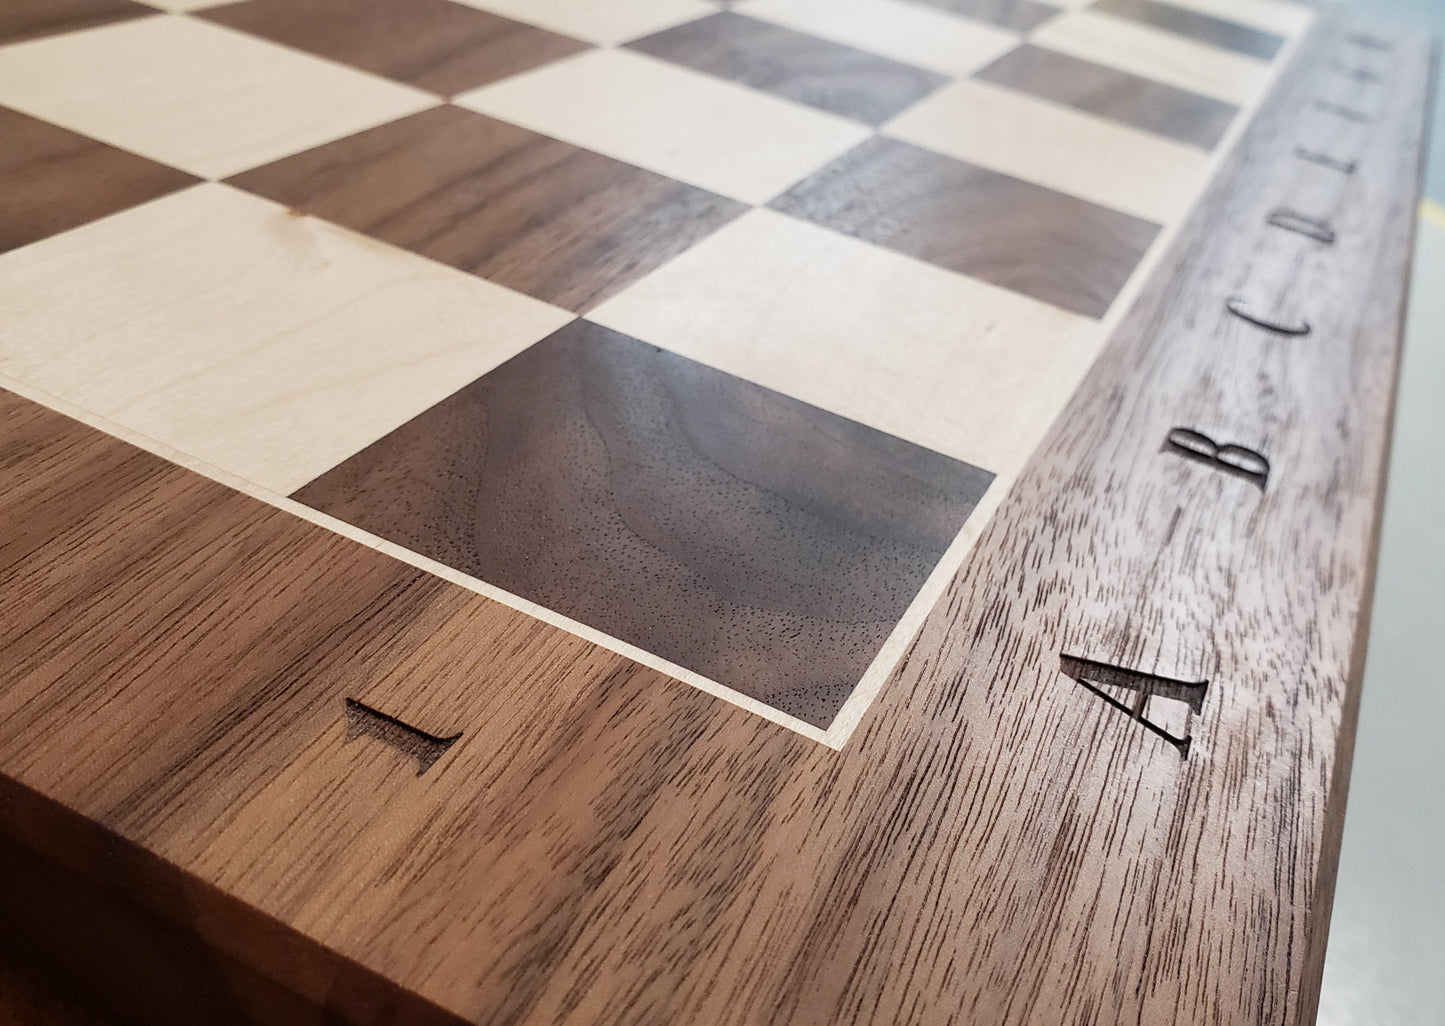 The Stefan Chess Board - Hardwood Chess Board - Large Regulation Size - 100% Solid Walnut and Maple - Handmade in British Columbia